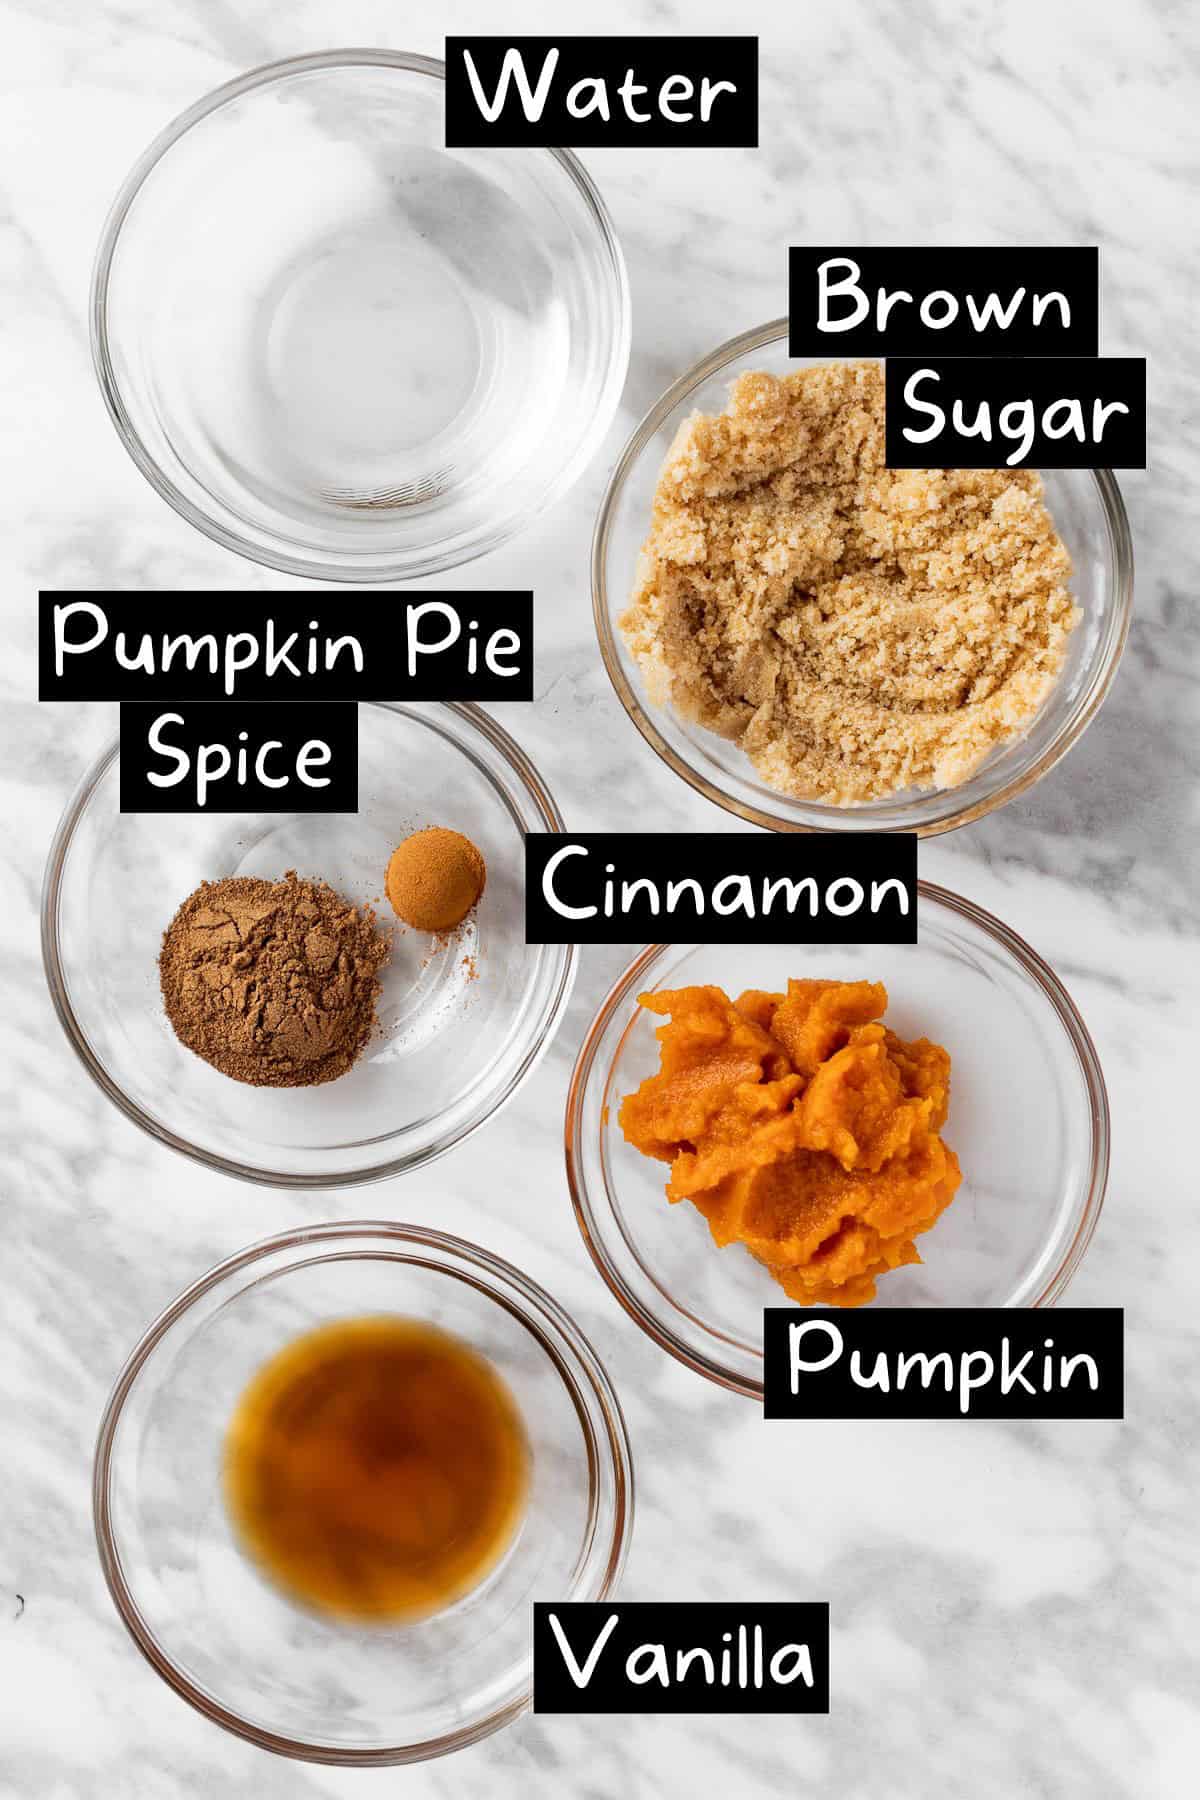 The ingredients needed to make the pumpkin spice syrup.